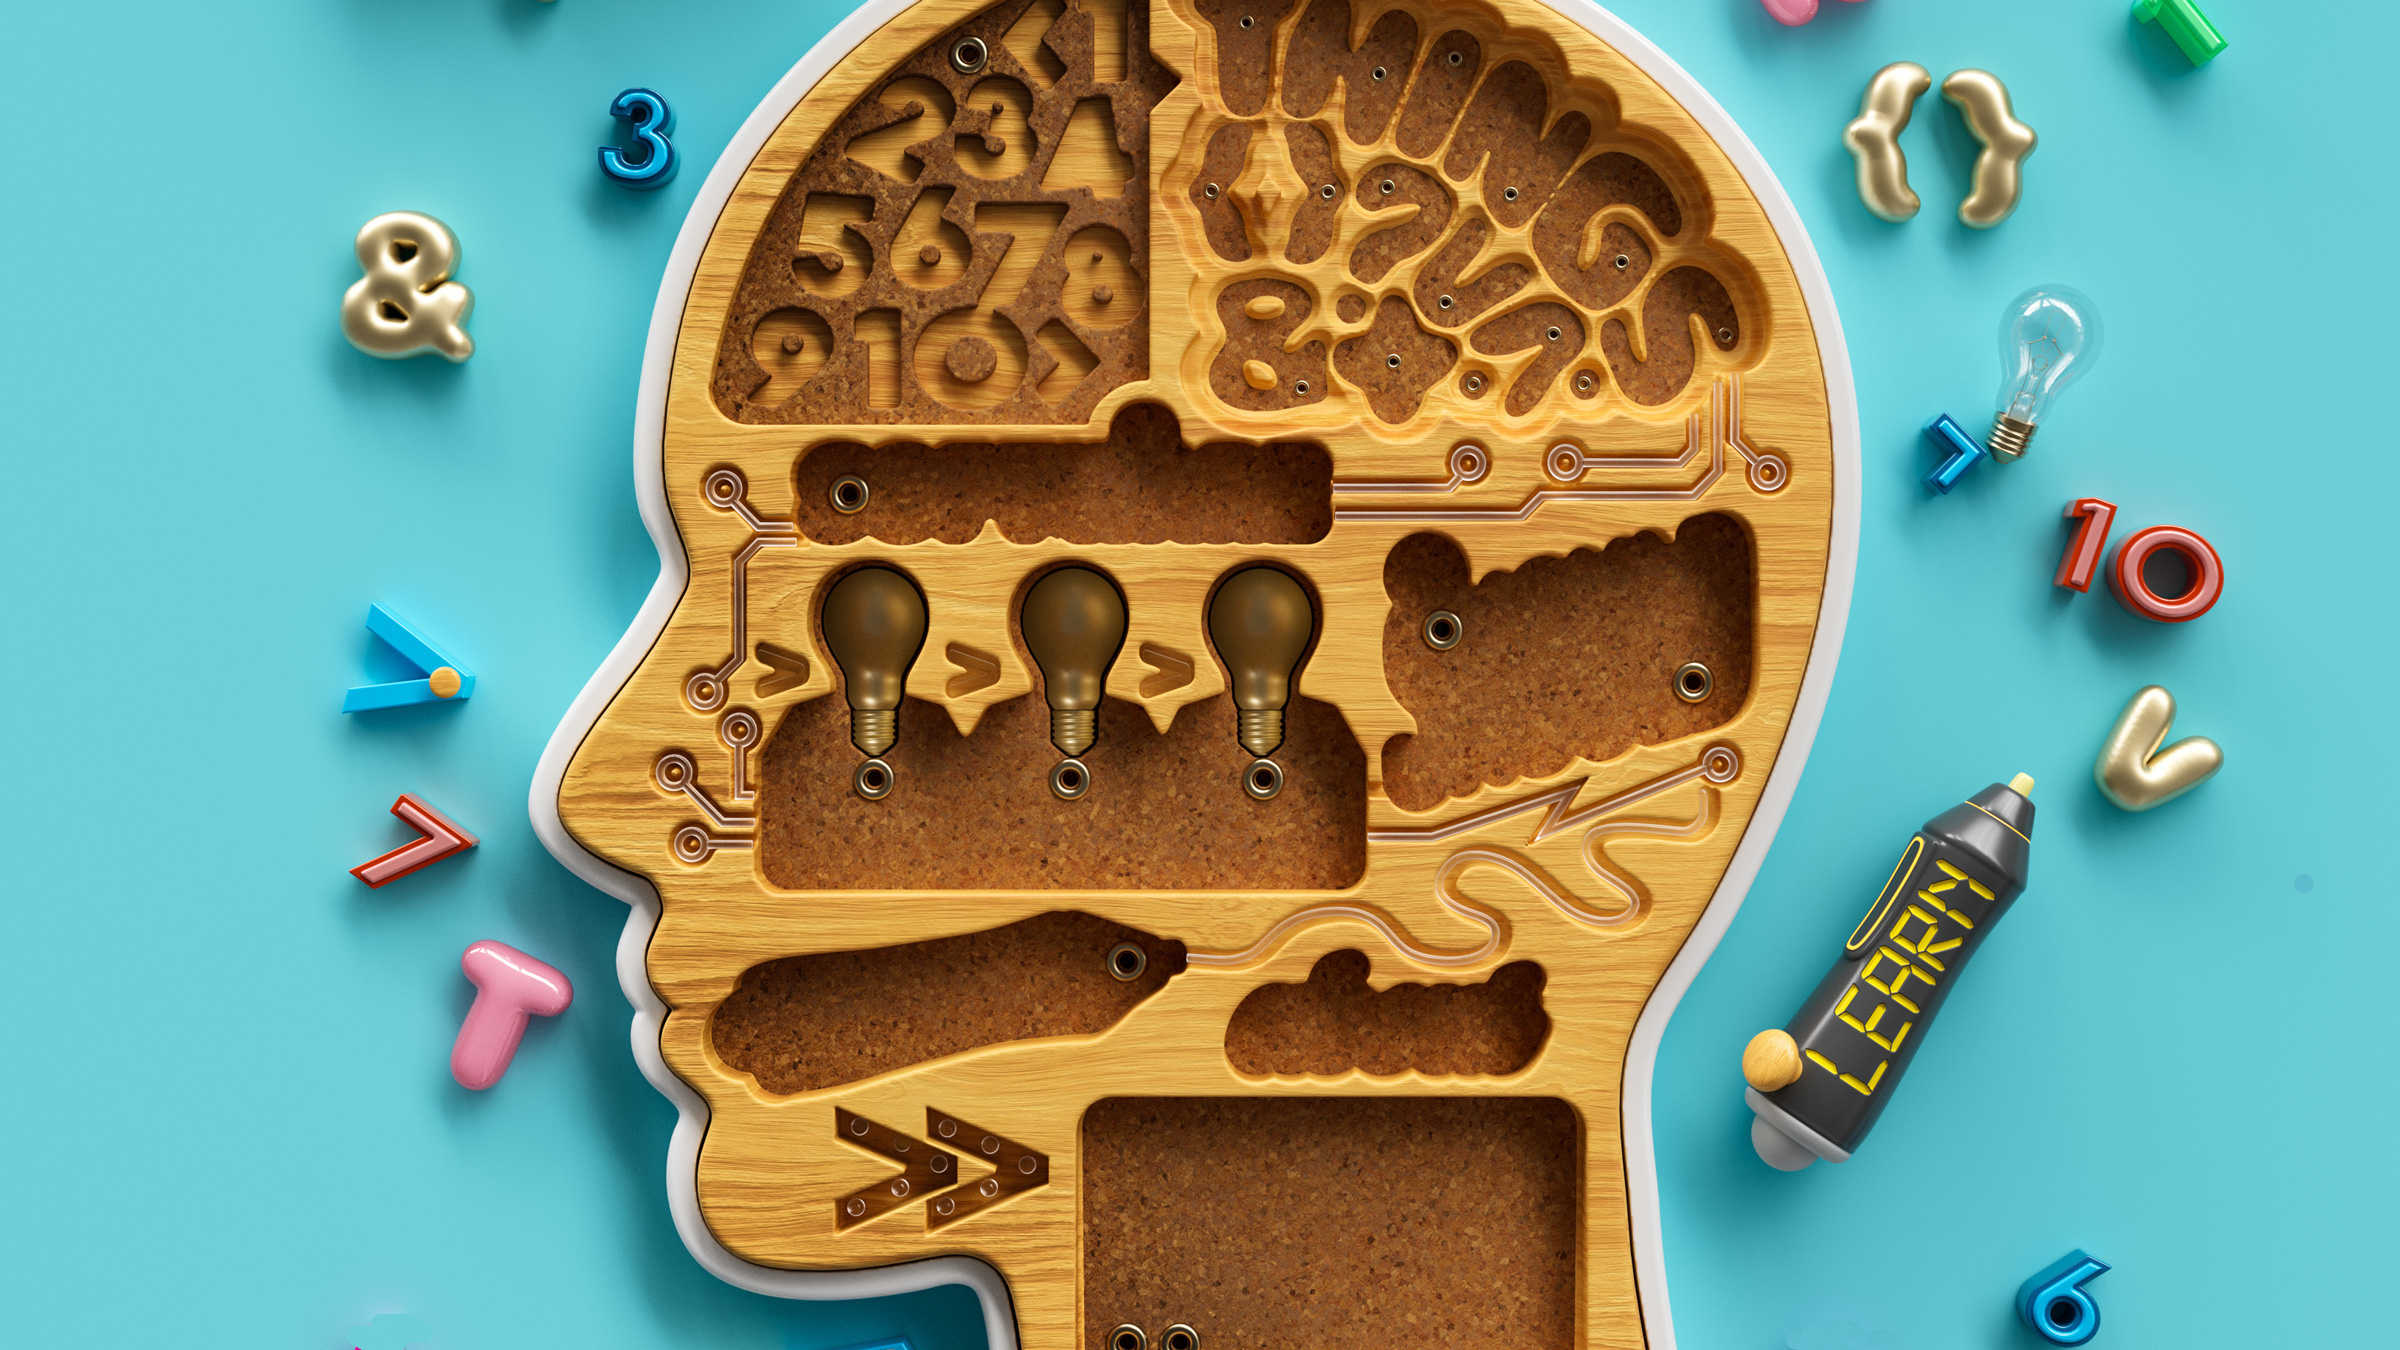 pieces surround a 3D puzzle of a person's head in profile, illustration